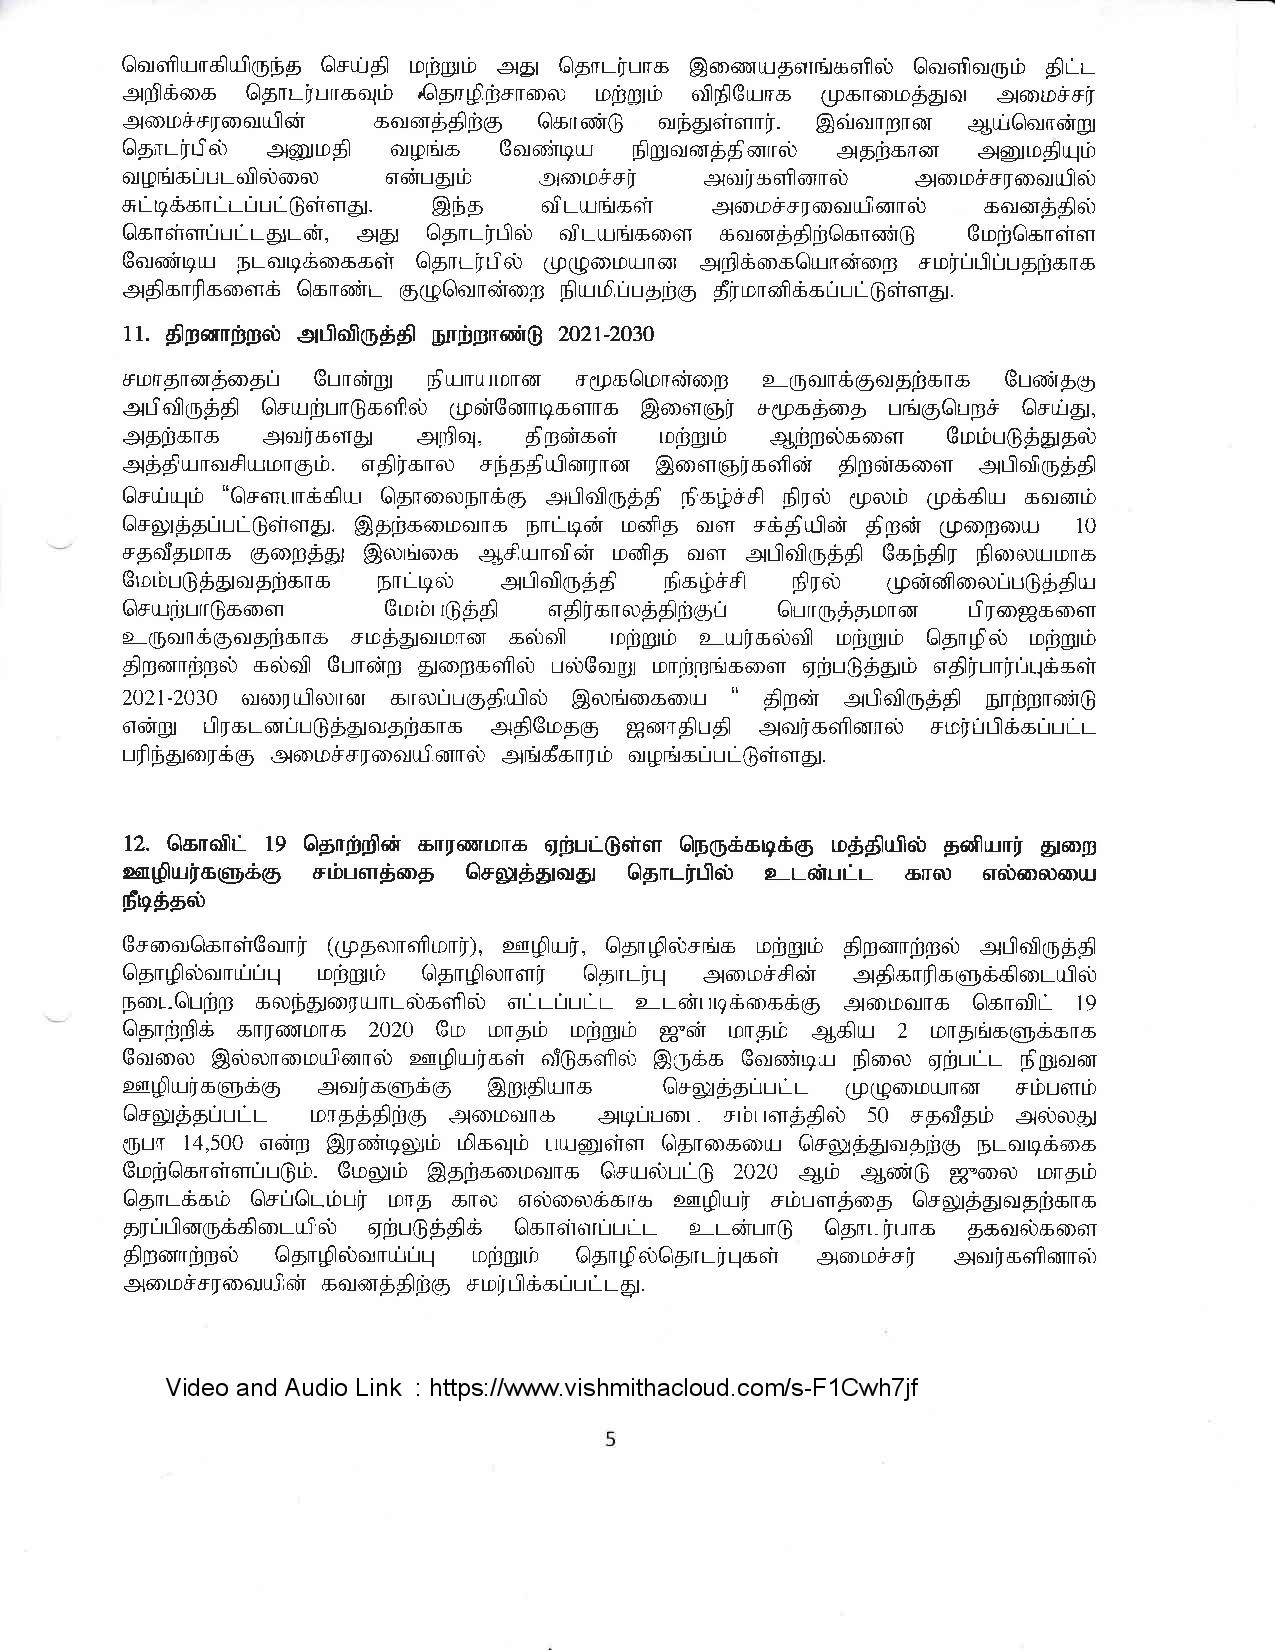 Cabinet Decision on 15.07.2020 Tamil page 005 1